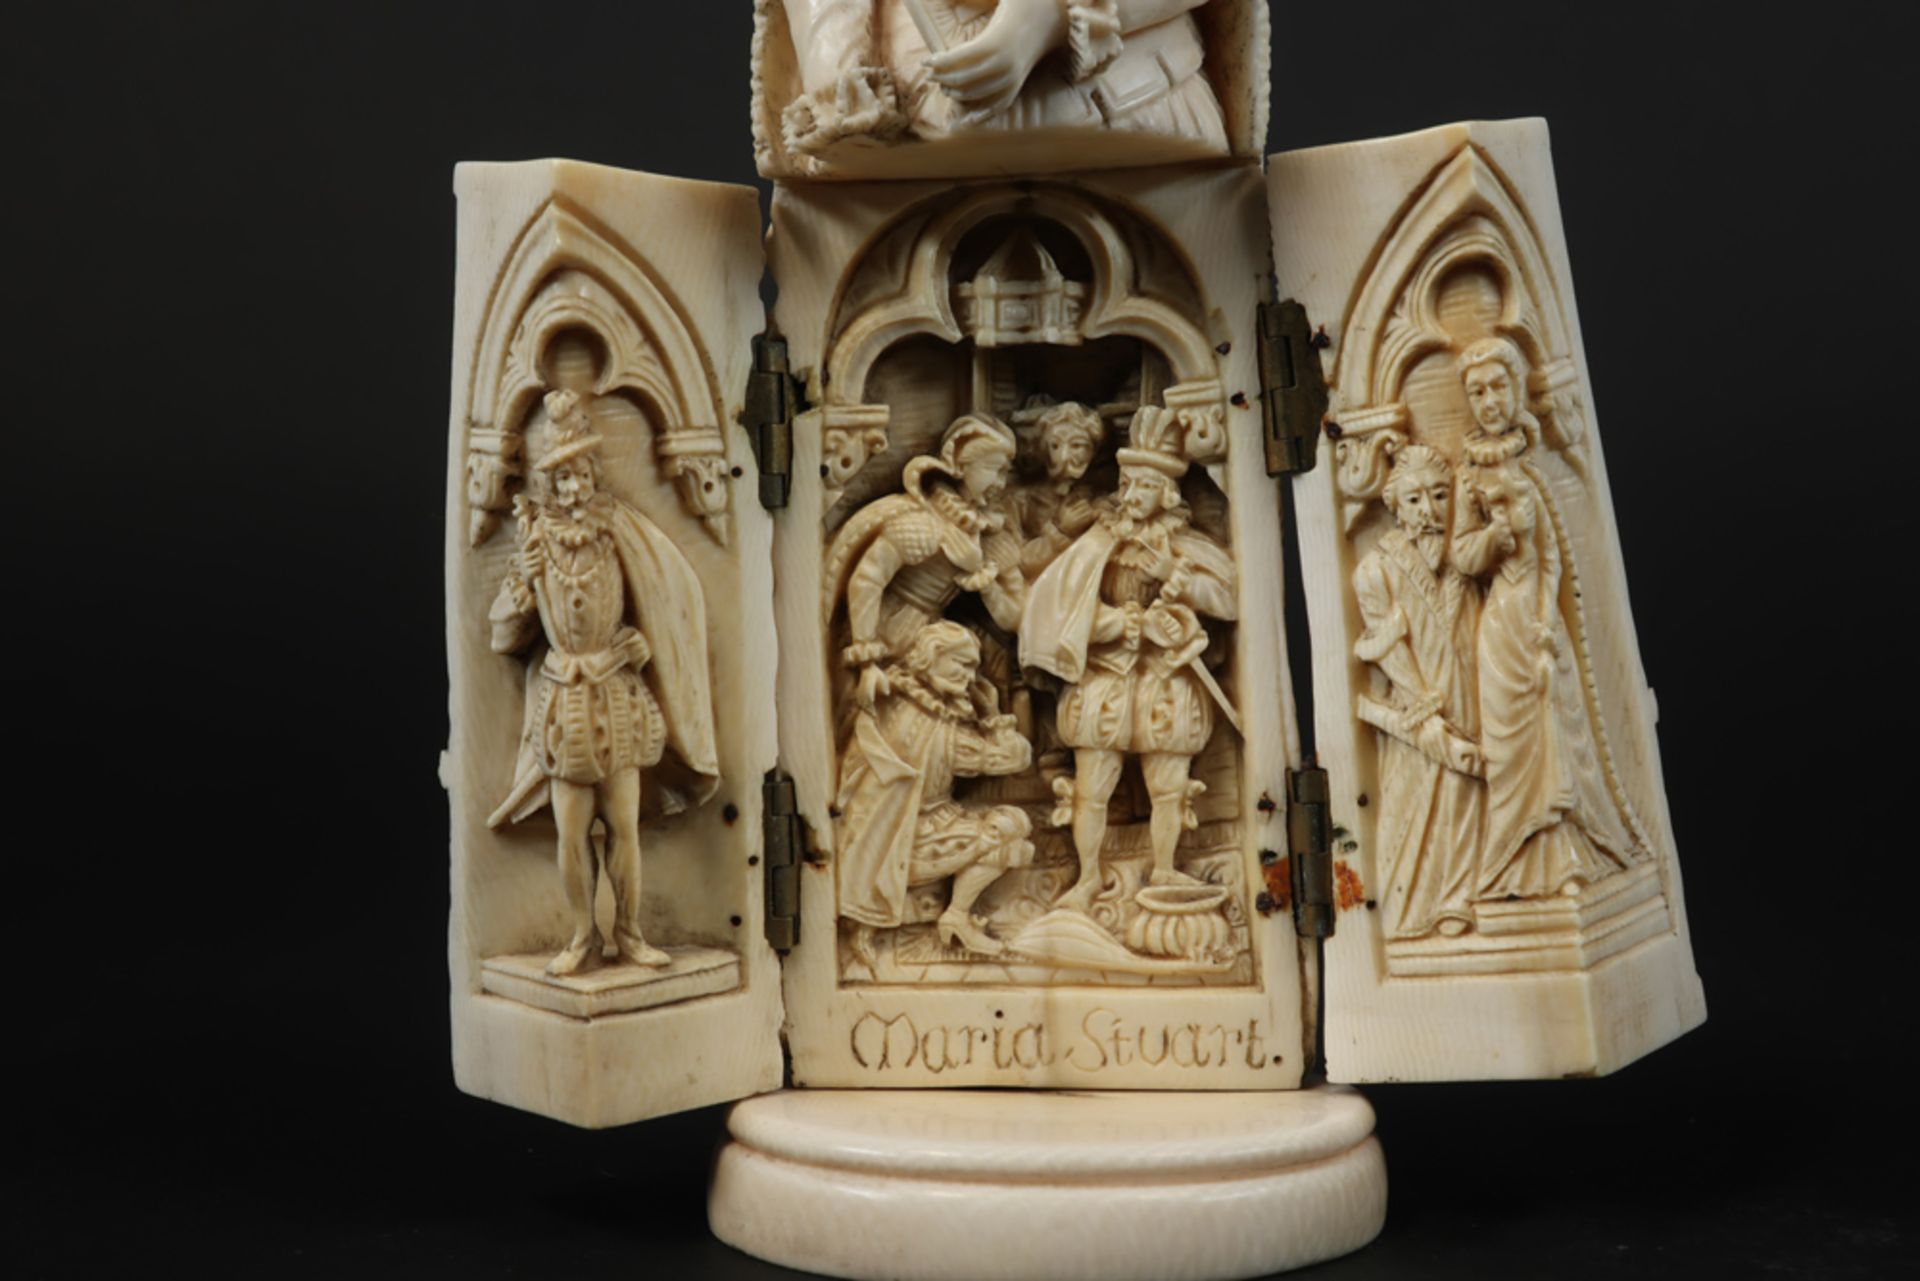 19th Cent European, presumably German, sculpture in ivory depicting Mary Stuart (queen of Scots) , - Image 7 of 8